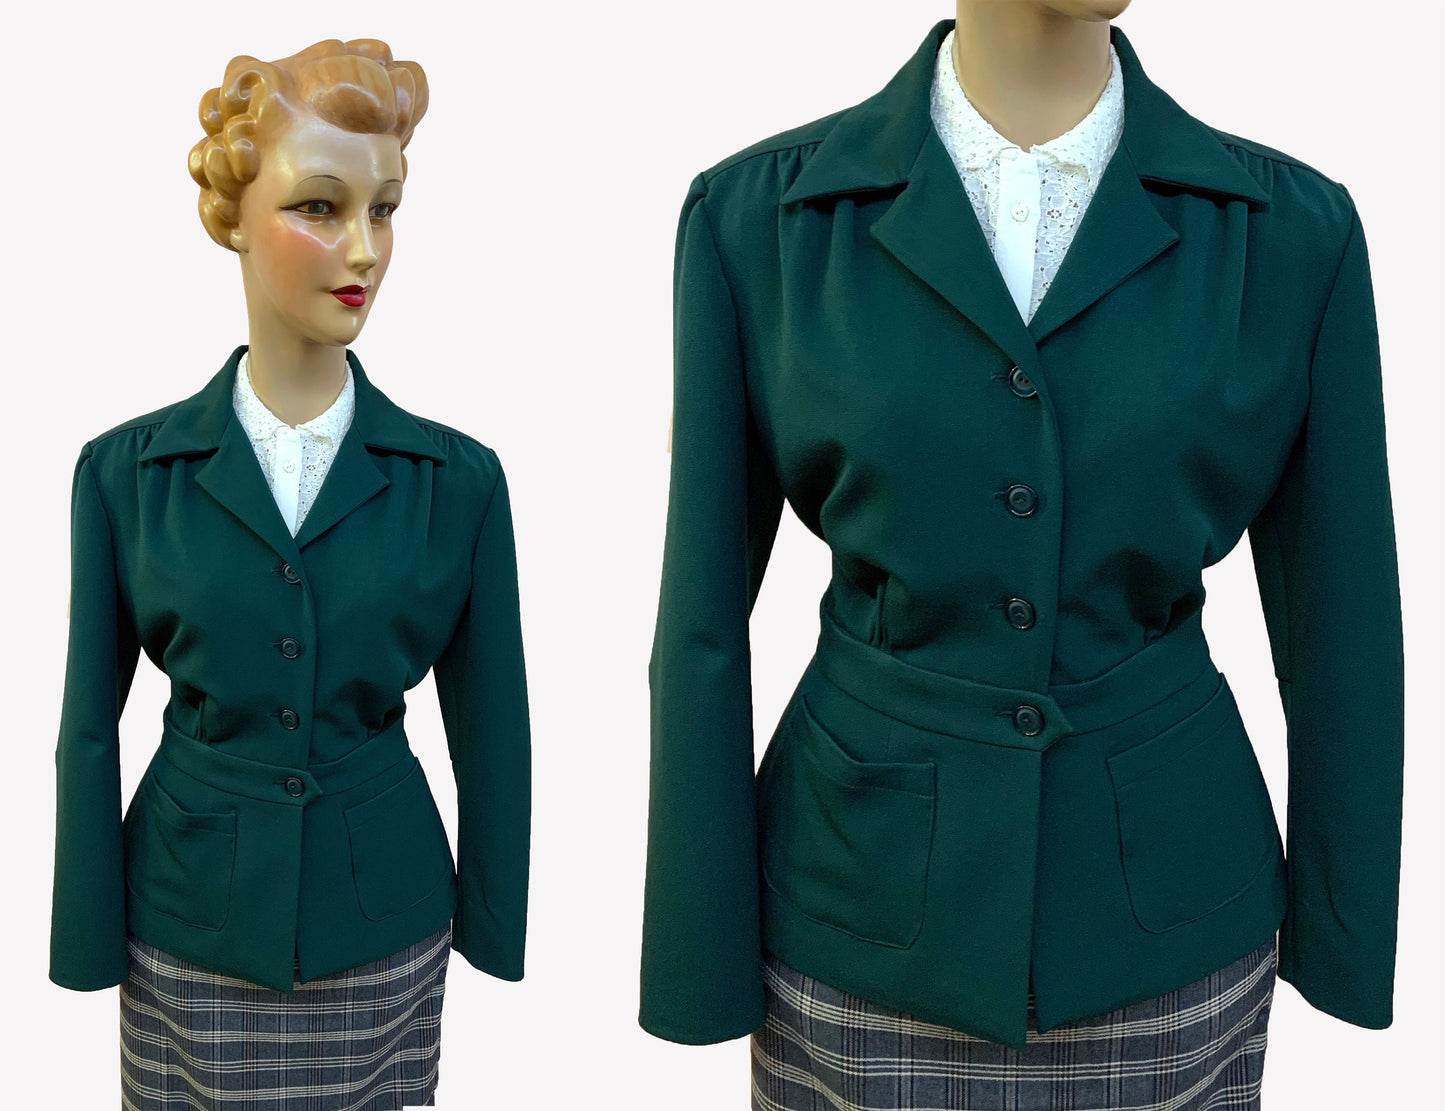 Lindy - 1940s Jacket Green